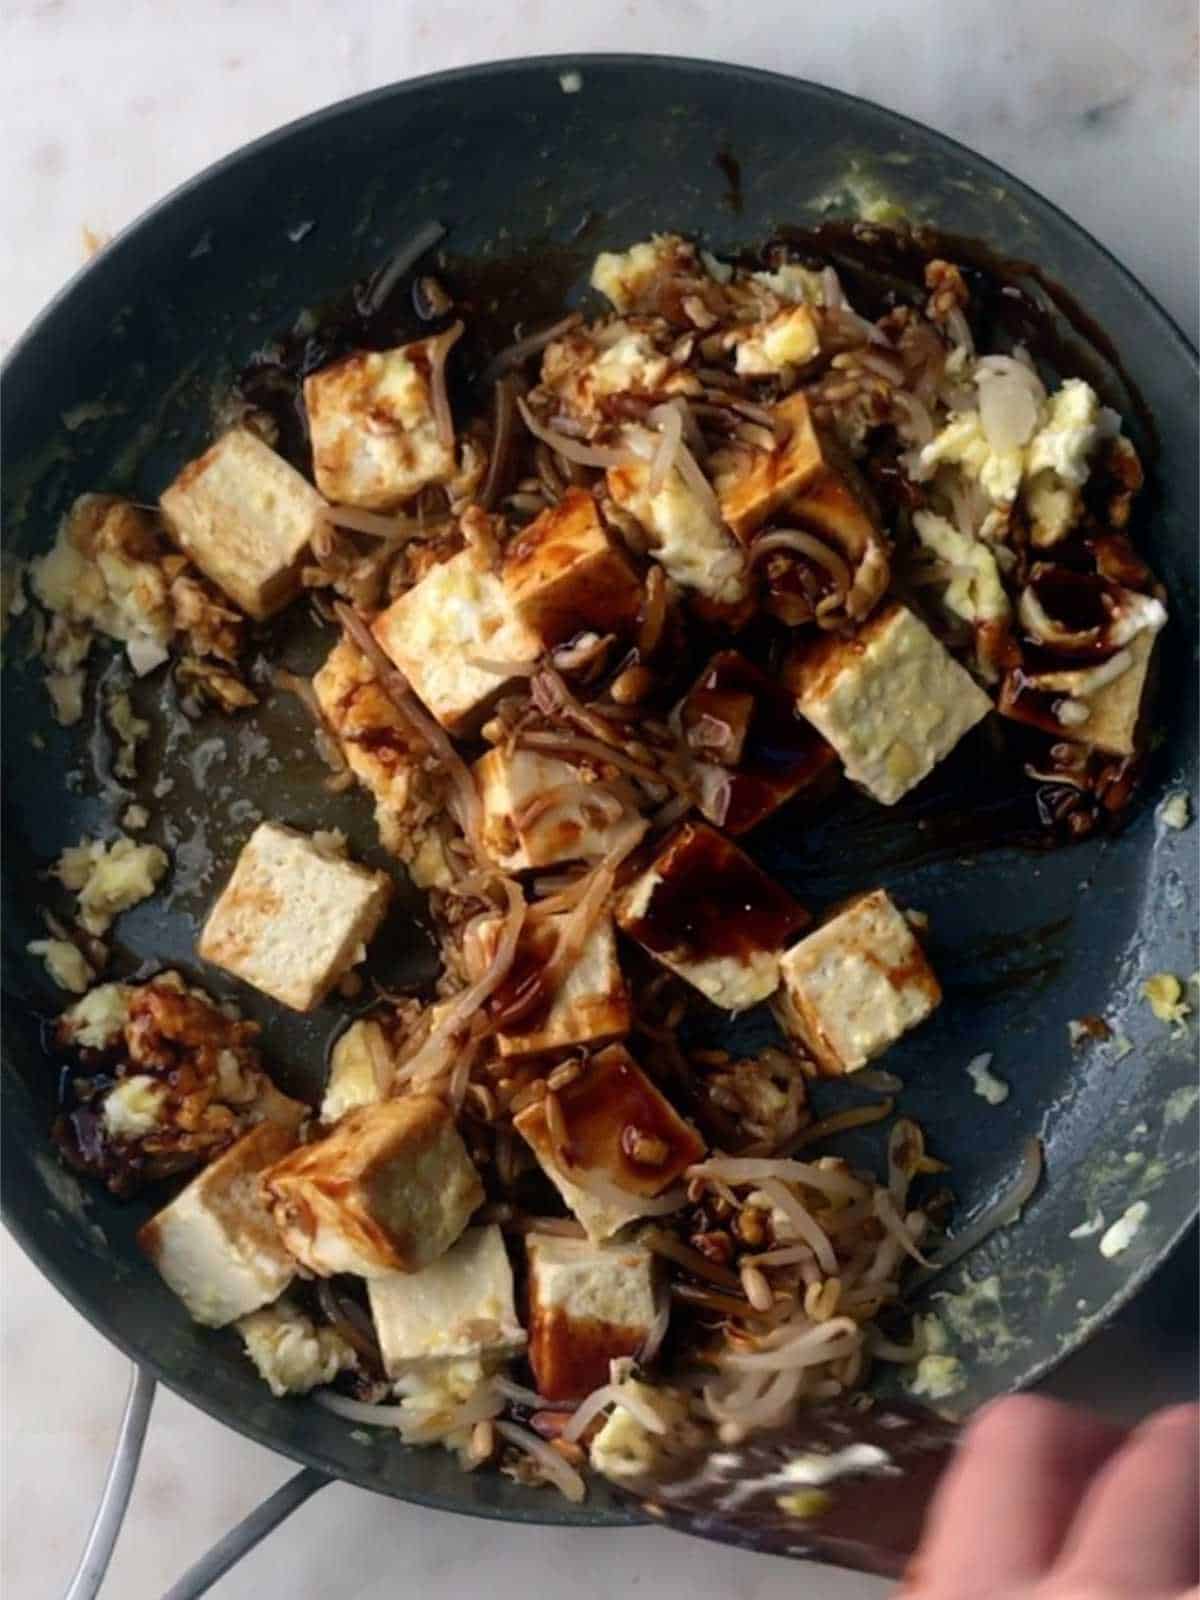 Saucy tofu in a pan.